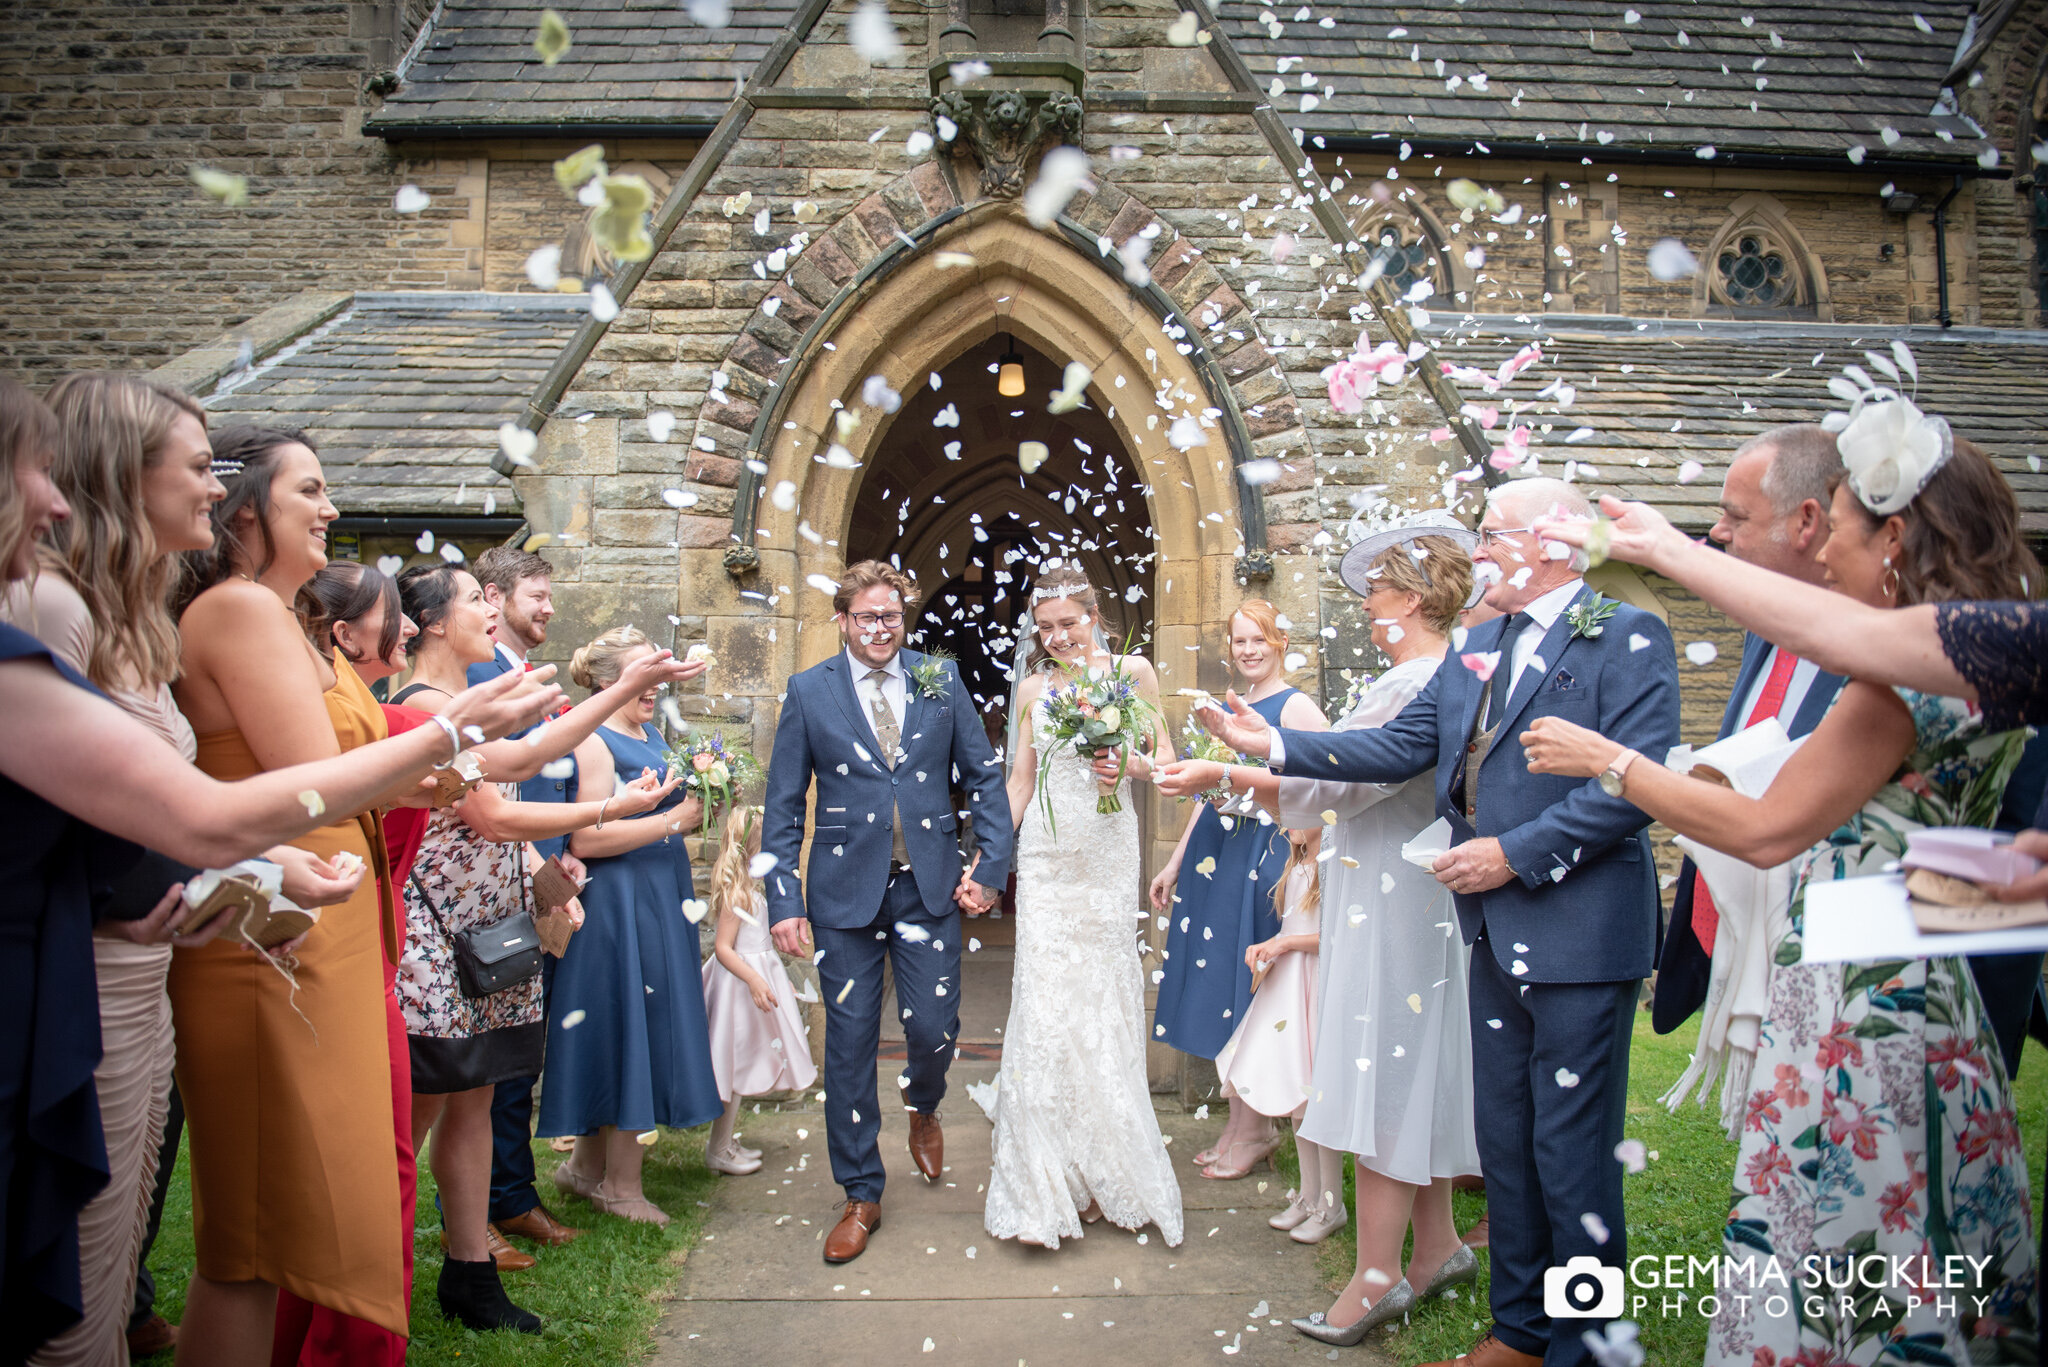 wedding guests throwing confetti at the bride and groom outside Carleton church